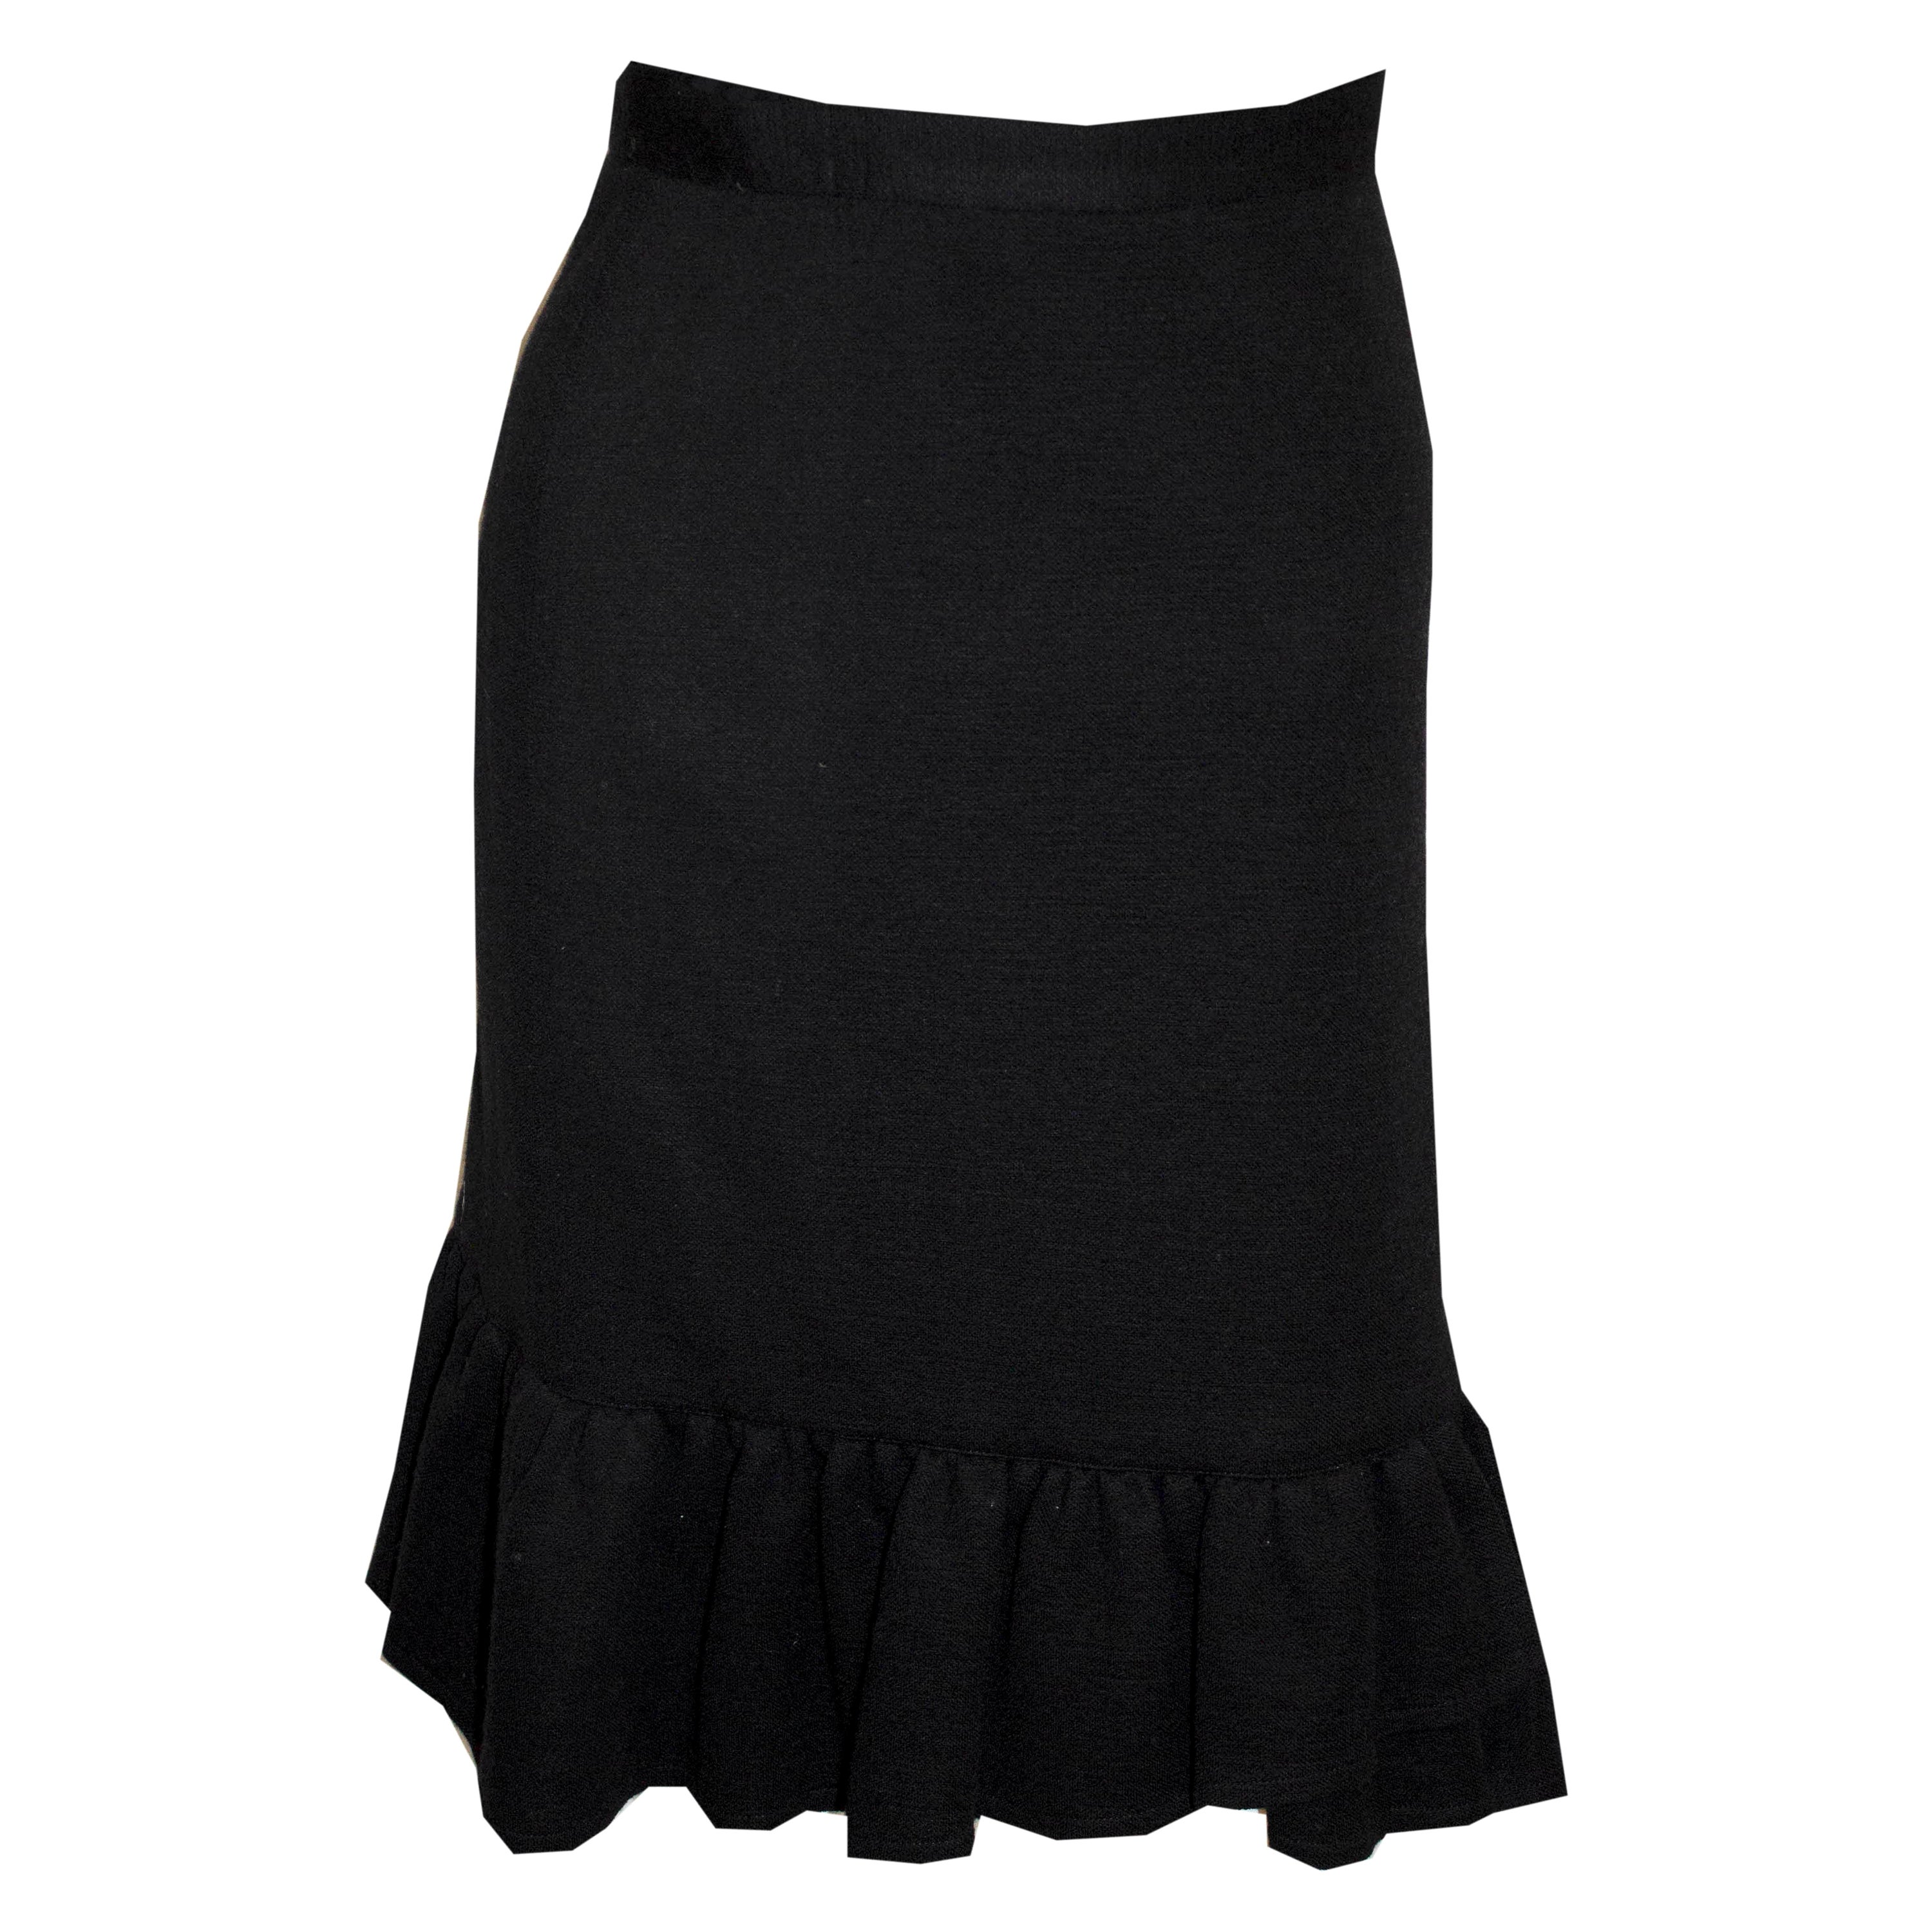 Sonia Rykiel Black Wool Skirt with Interesting Frill For Sale